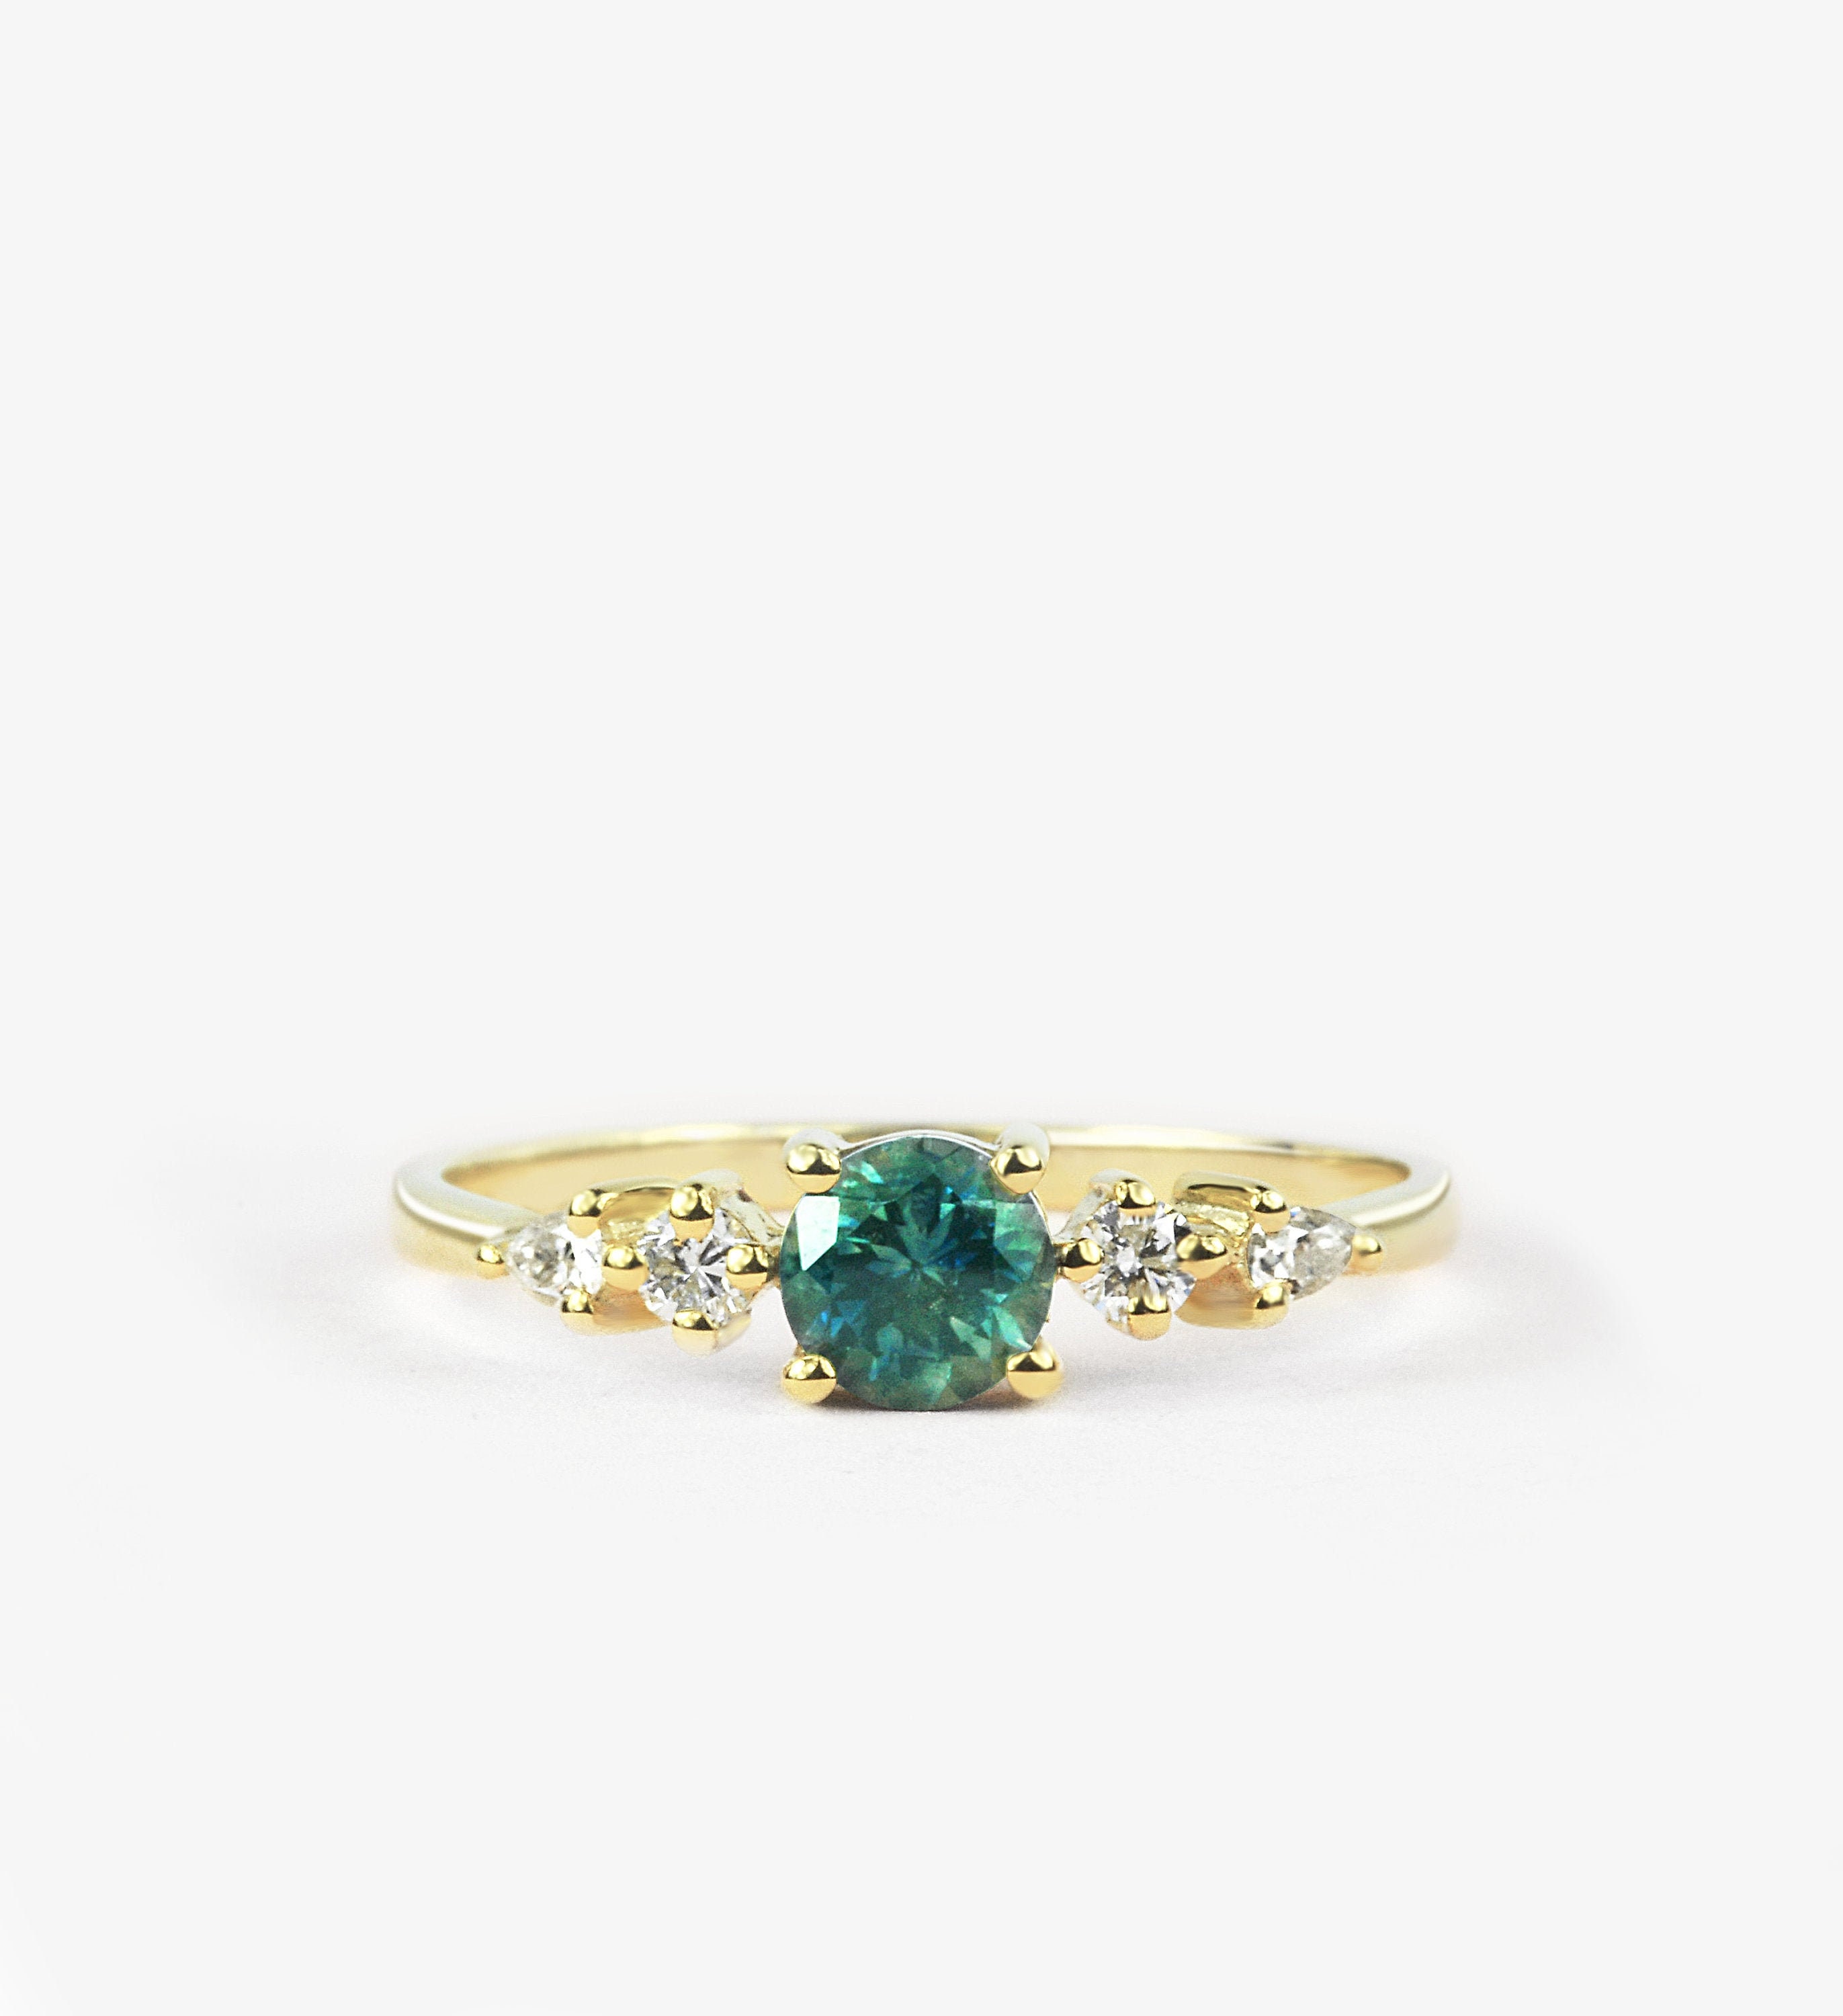 Teal Sapphire Engagement Ring Handmade in Rose/White/Yellow Gold With Diamonds Antique Inspired, Sapphire Engagement Ring